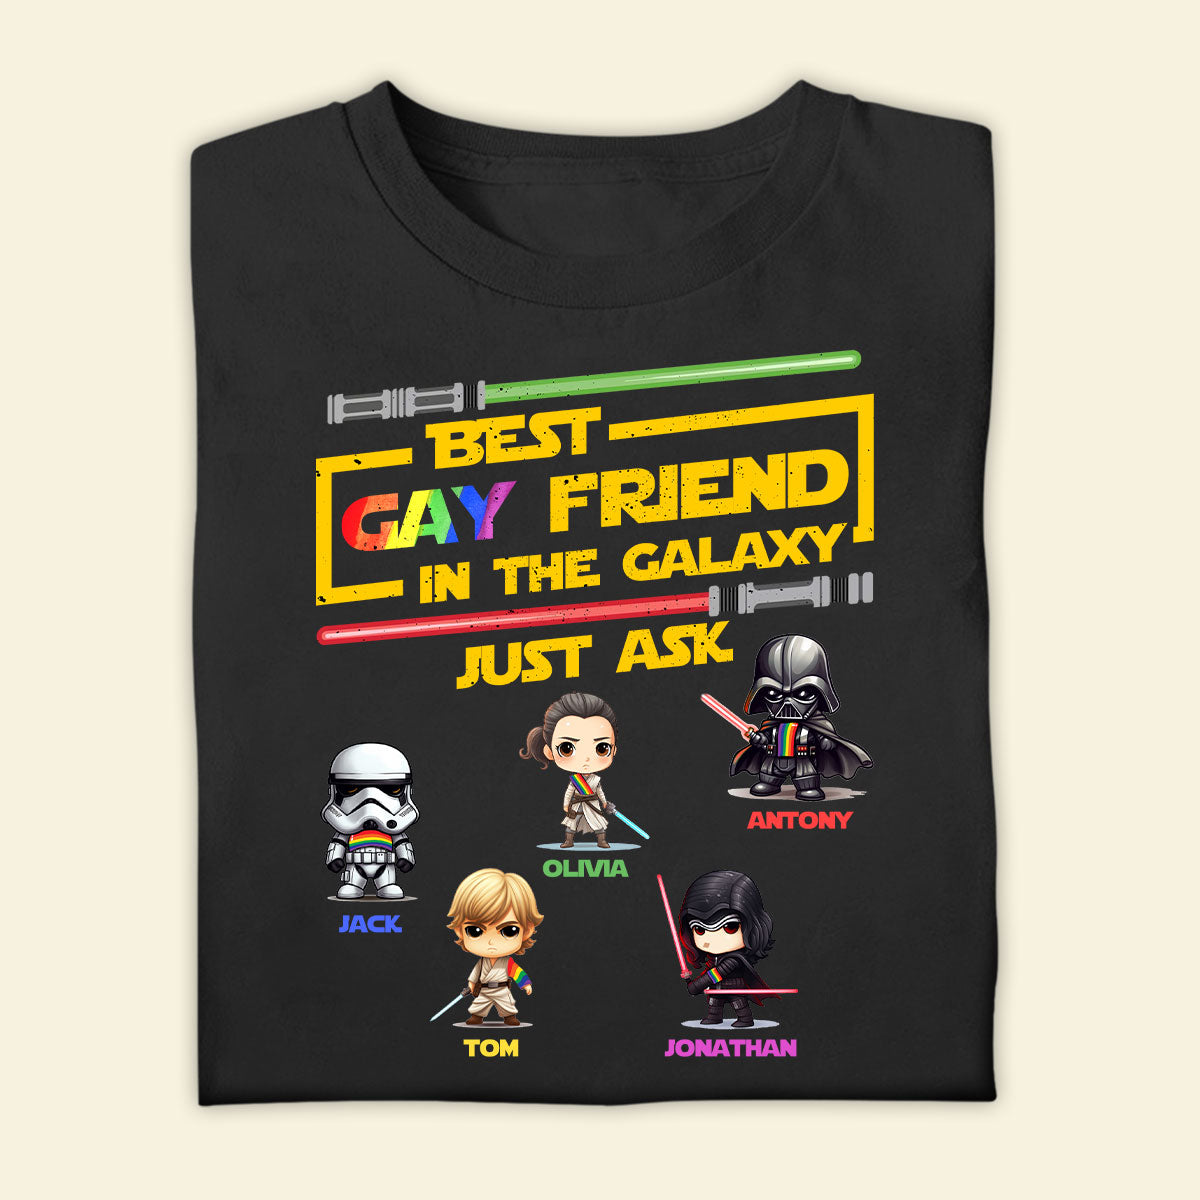 Best Customized Apparel - Best Gay Friend In The Galaxy - Customized Apparel for Gay Lesbian Trans Bi - Gift for LGBT Month, Birthday, Anniversary